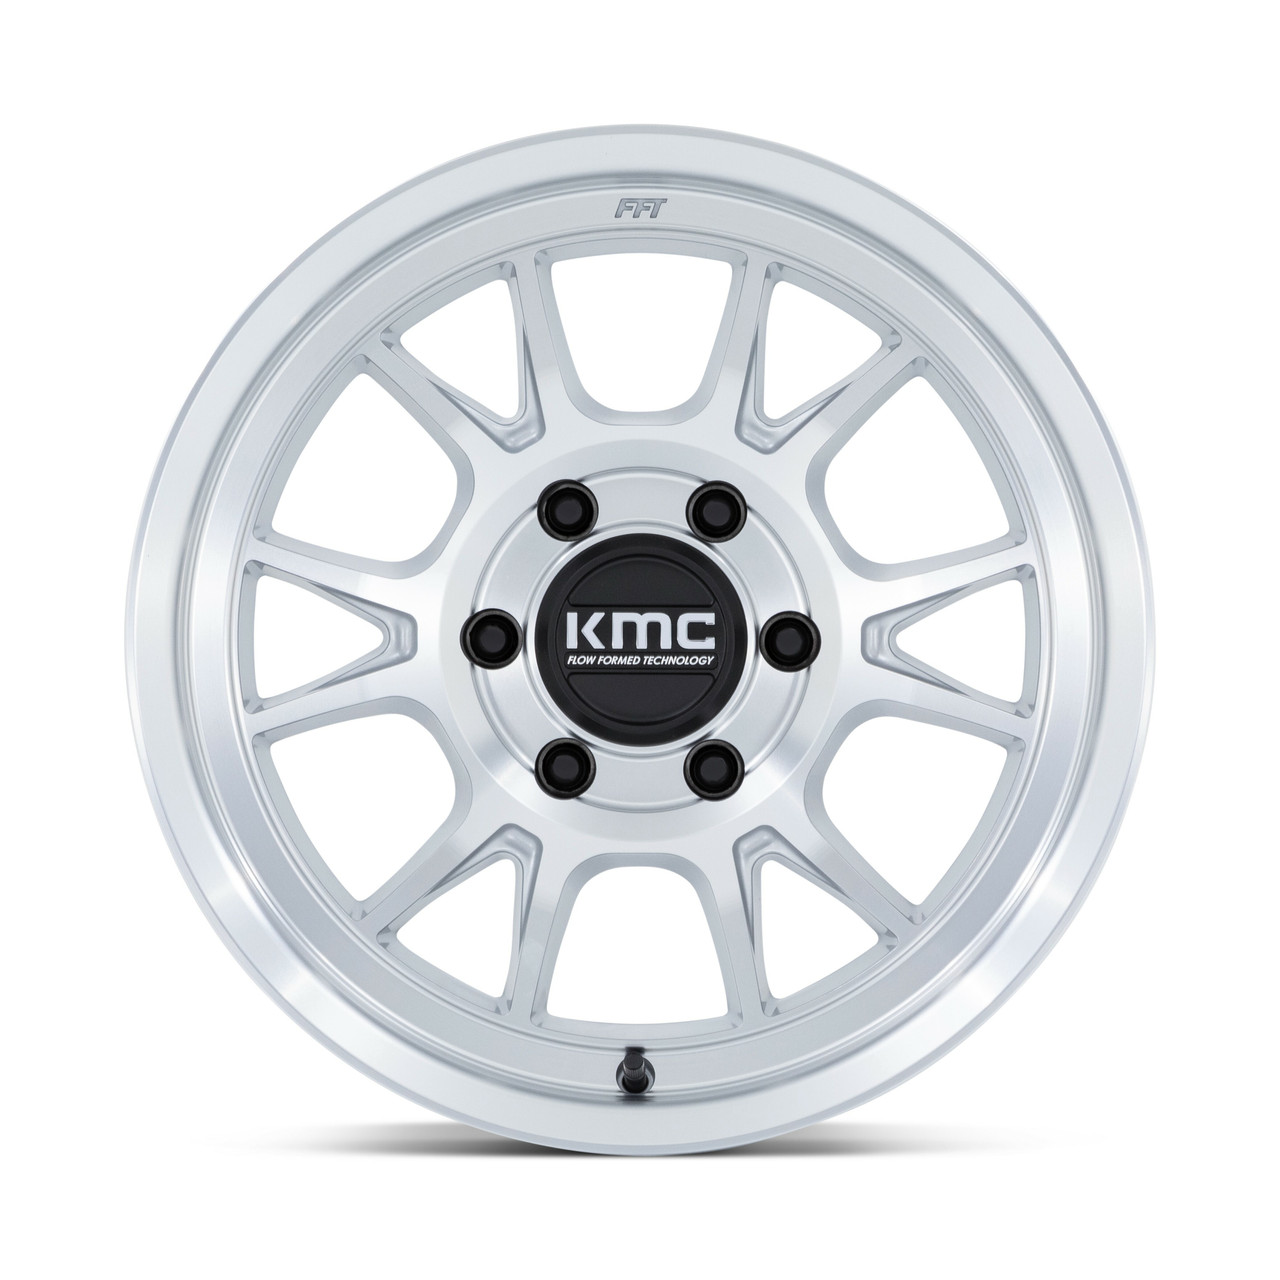 Set 4 KMC KM729 Range 17x8.5 6x135 Silver With Machined Face Wheels 17" 0mm